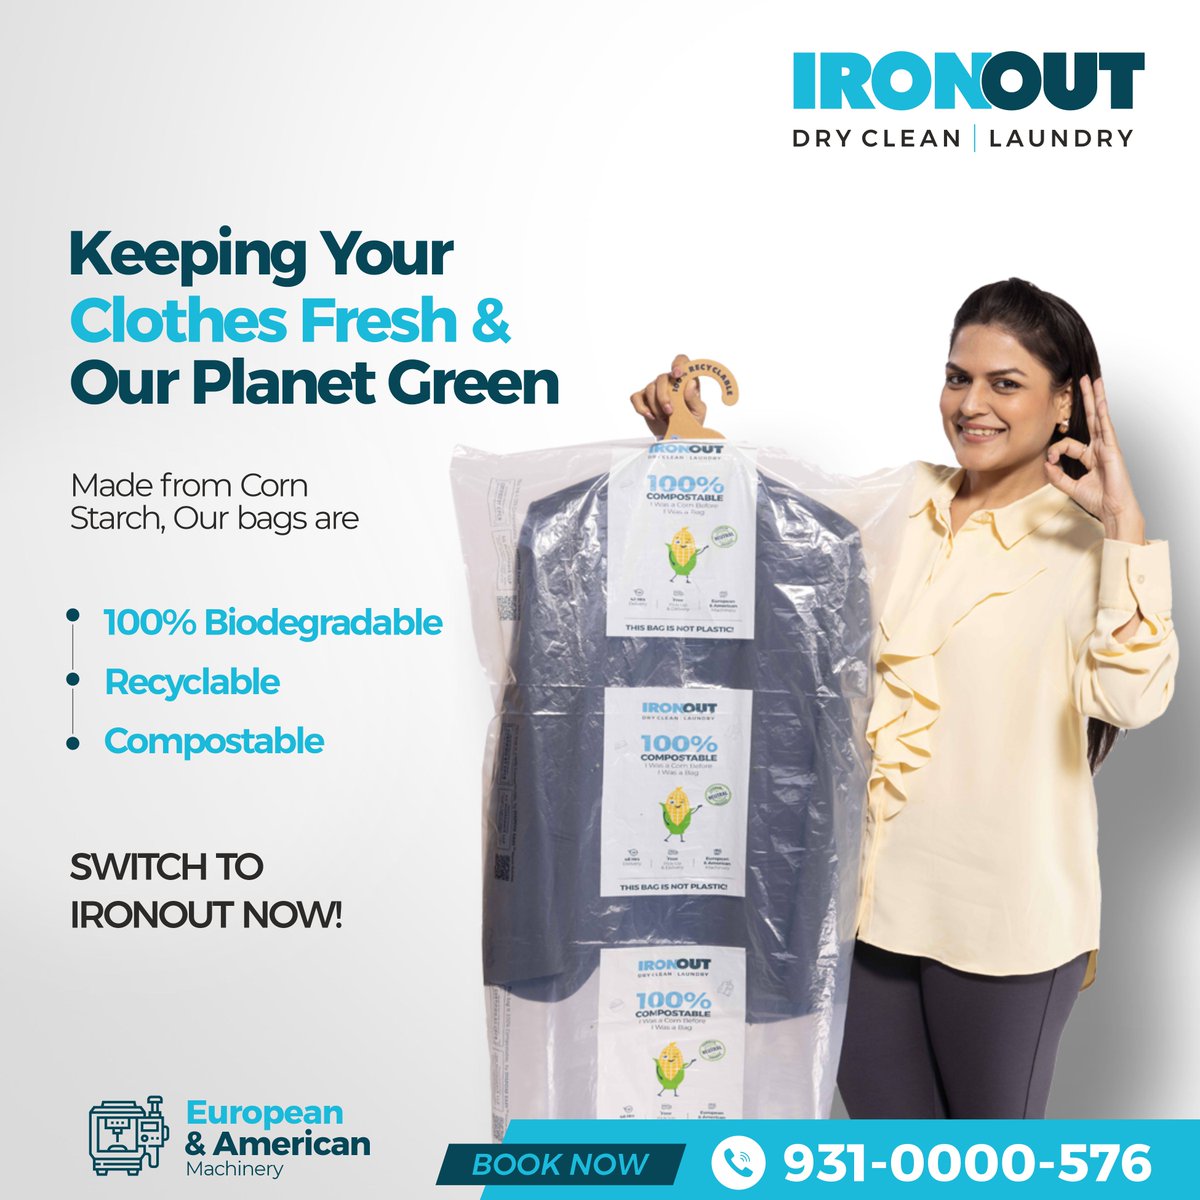 Keep your clothes fresh and our planet green with IronOut! 
Call us : 9310000576
.
.
.
#EcoFriendlyLaundry #IronOutGreenCleaning #IronOutCornStarchBags  #EnvironmentallyFriendly
#CleanAndGreen